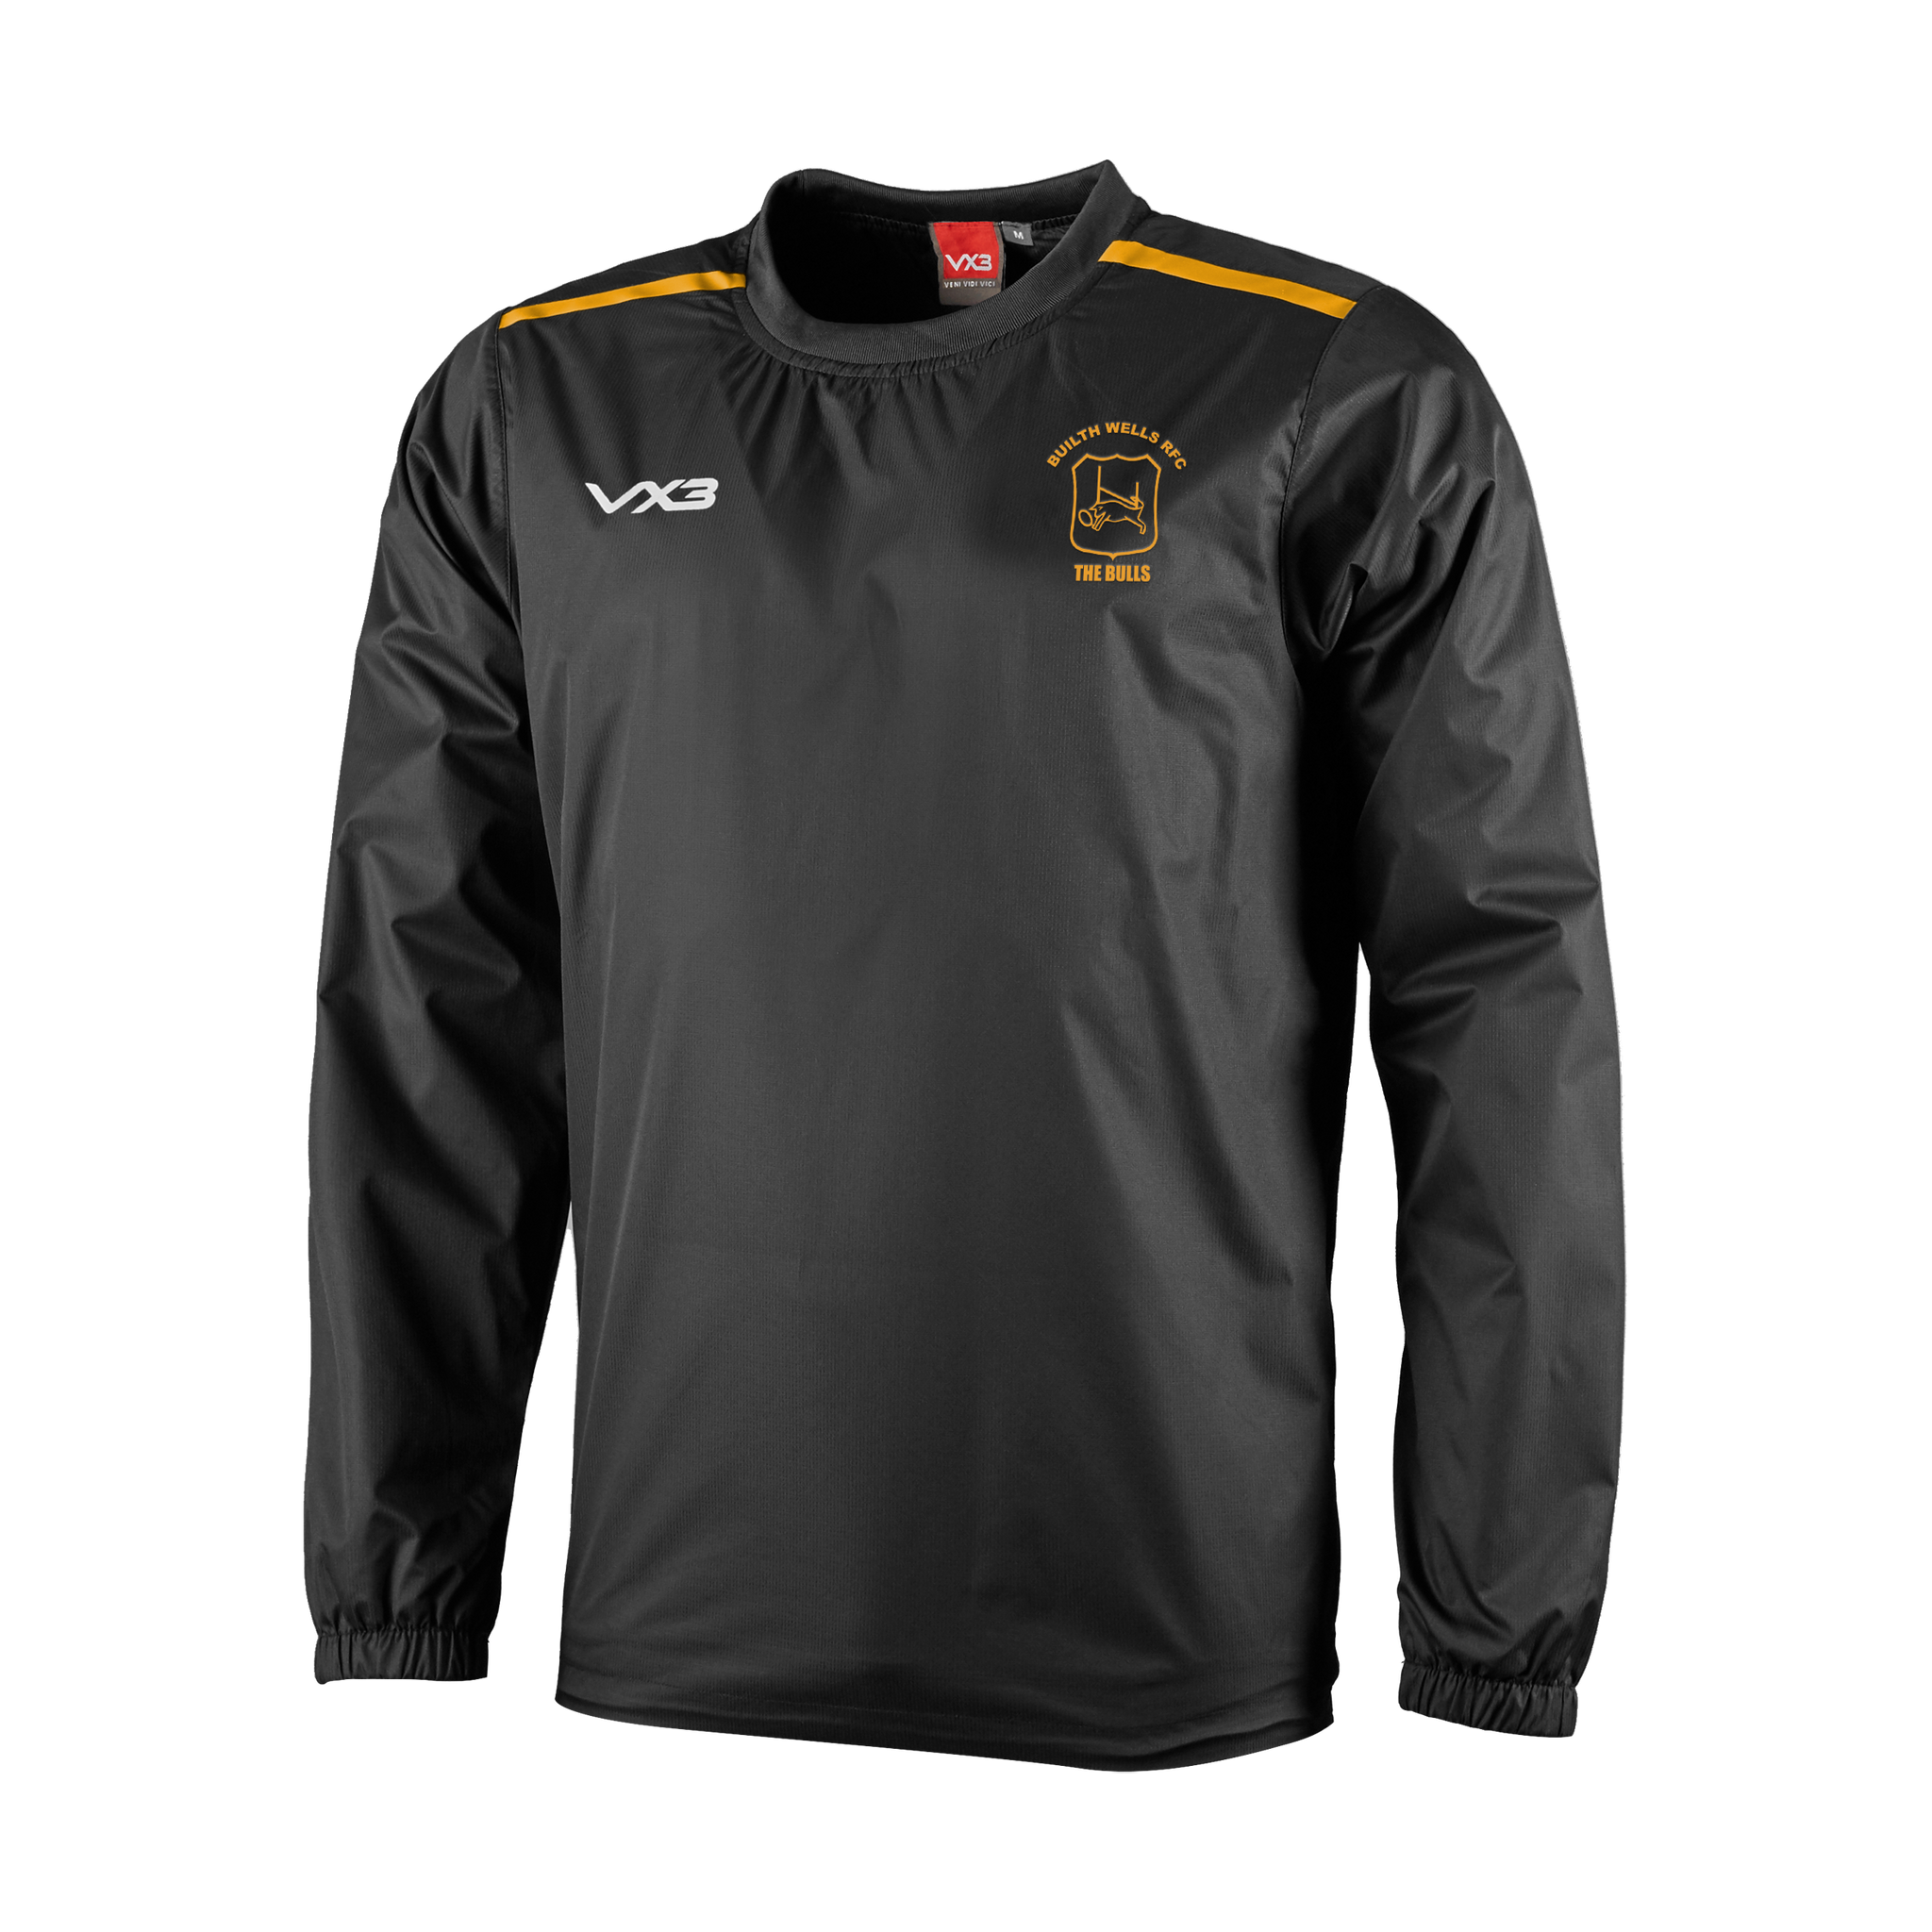 Builth Wells RFC Fortis Youth Smock